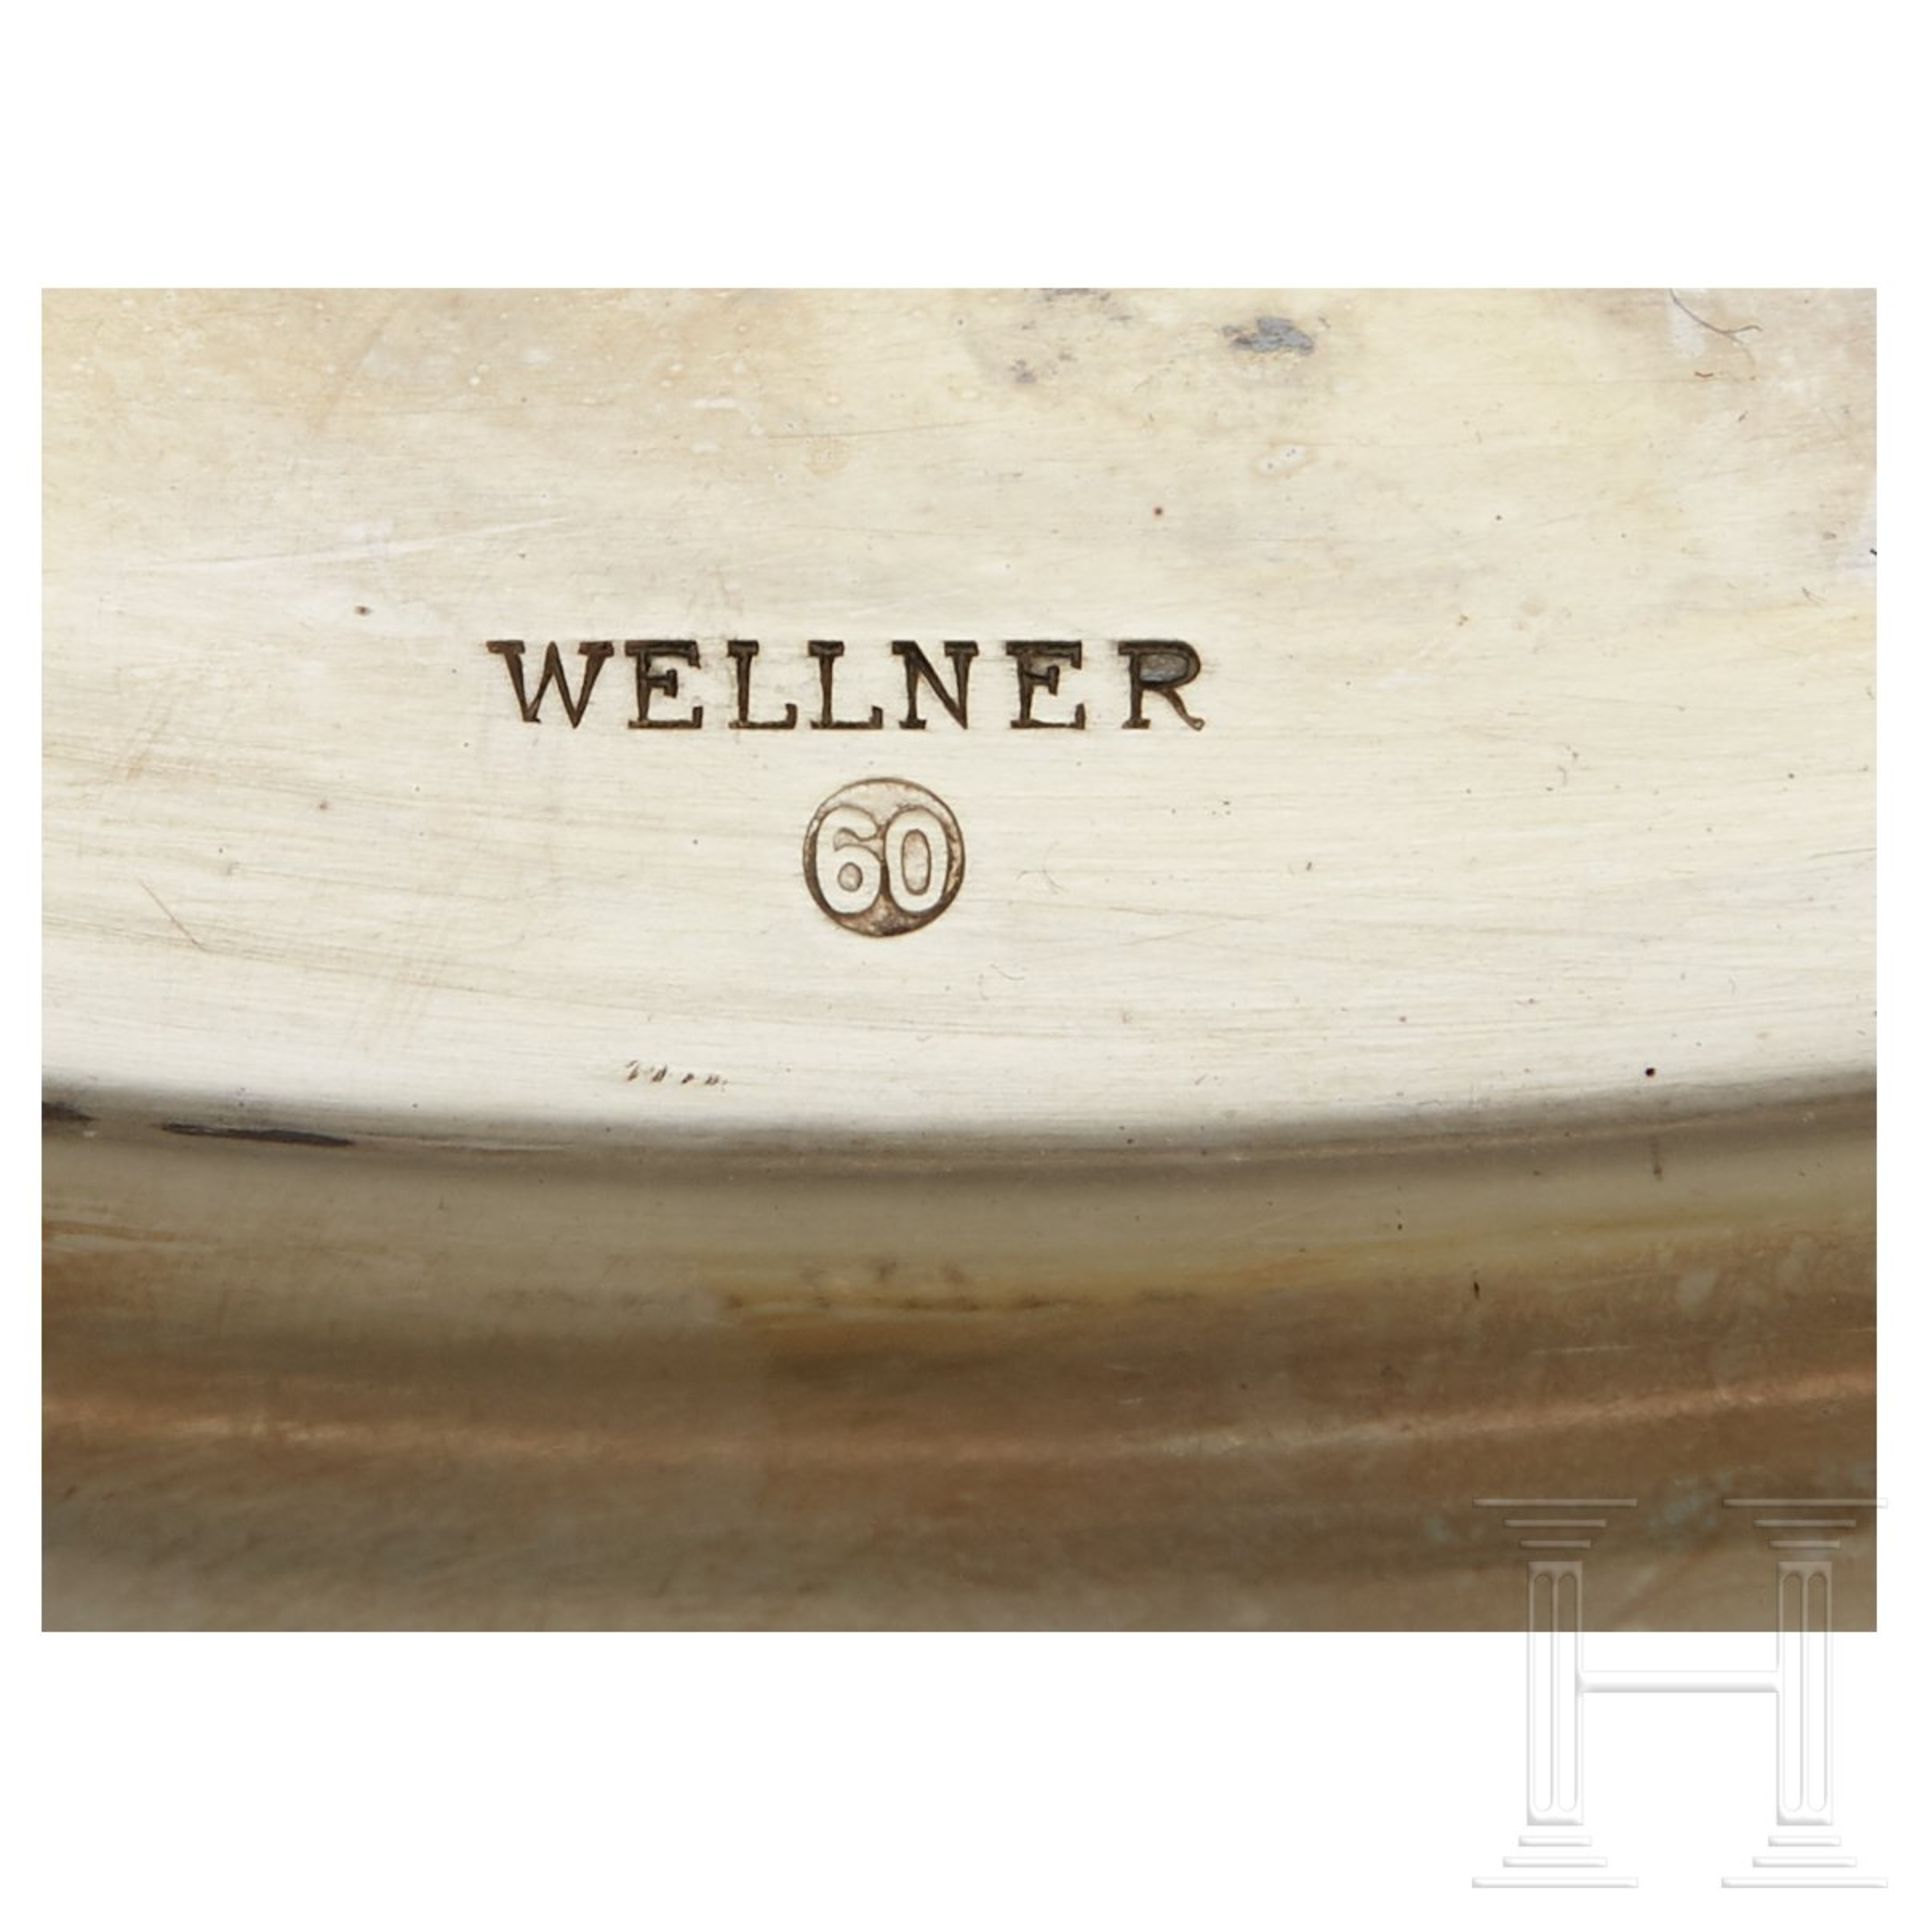 An oval Serving Platter from a Silver ServiceUnmarked platter, stamped "Wellner", "60" on top - Image 3 of 3